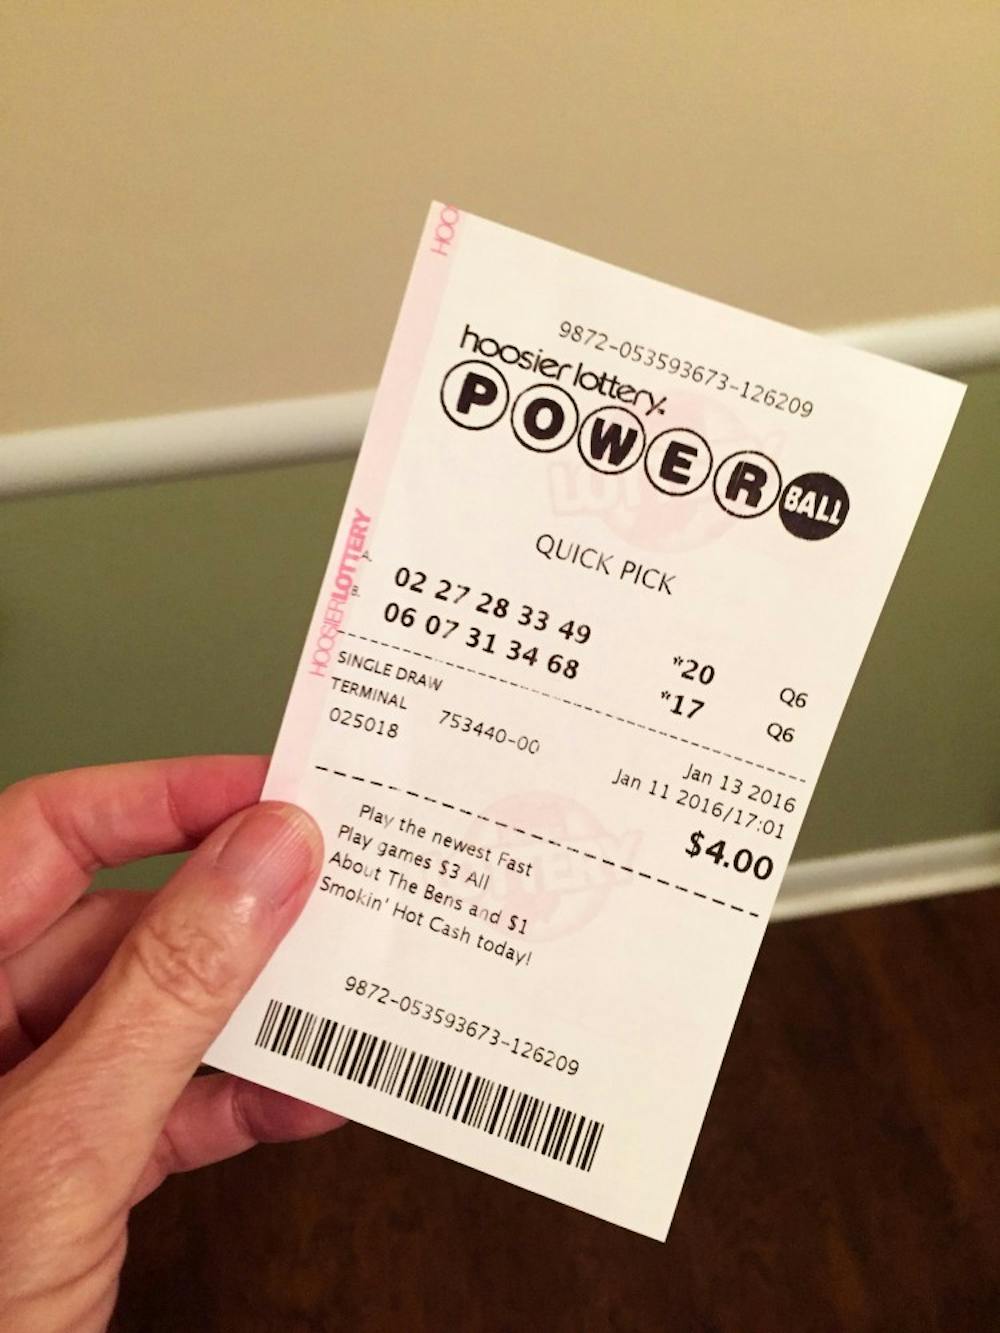 <p>The winning numbers for the largest Powerball lottery in the world history will be announced on Jan. 13. The jackpot&nbsp;has gone up to $1.5 billion, and the odds are winning are 1 in 292,201,338.&nbsp;<i style="background-color: initial;">DN PHOTO MARTHA STRAUSS</i></p>